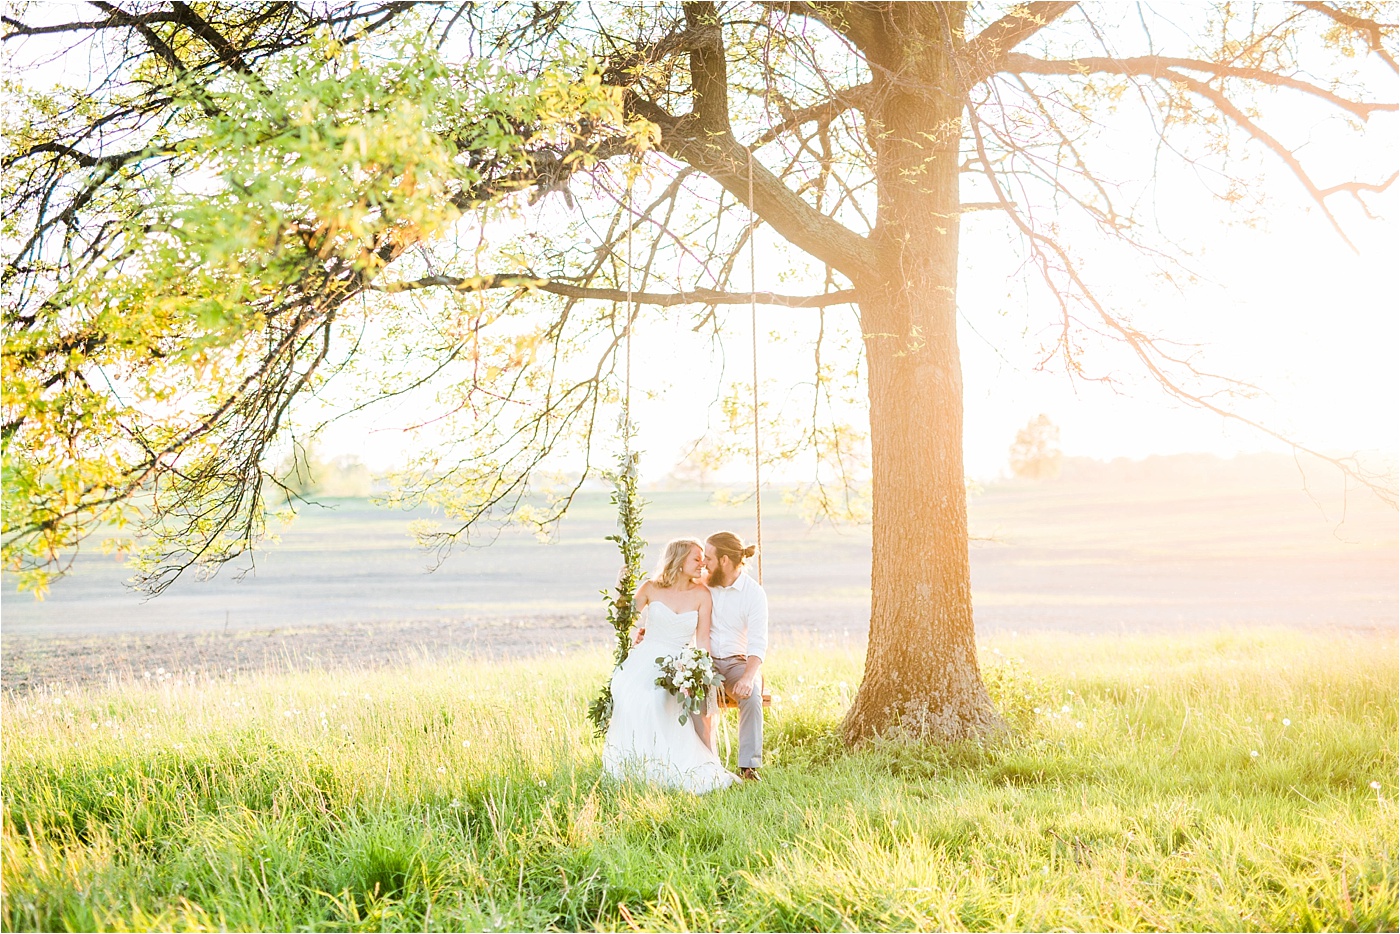 View More: http://karimephotography.pass.us/spring-styled-shoot-karime-photography